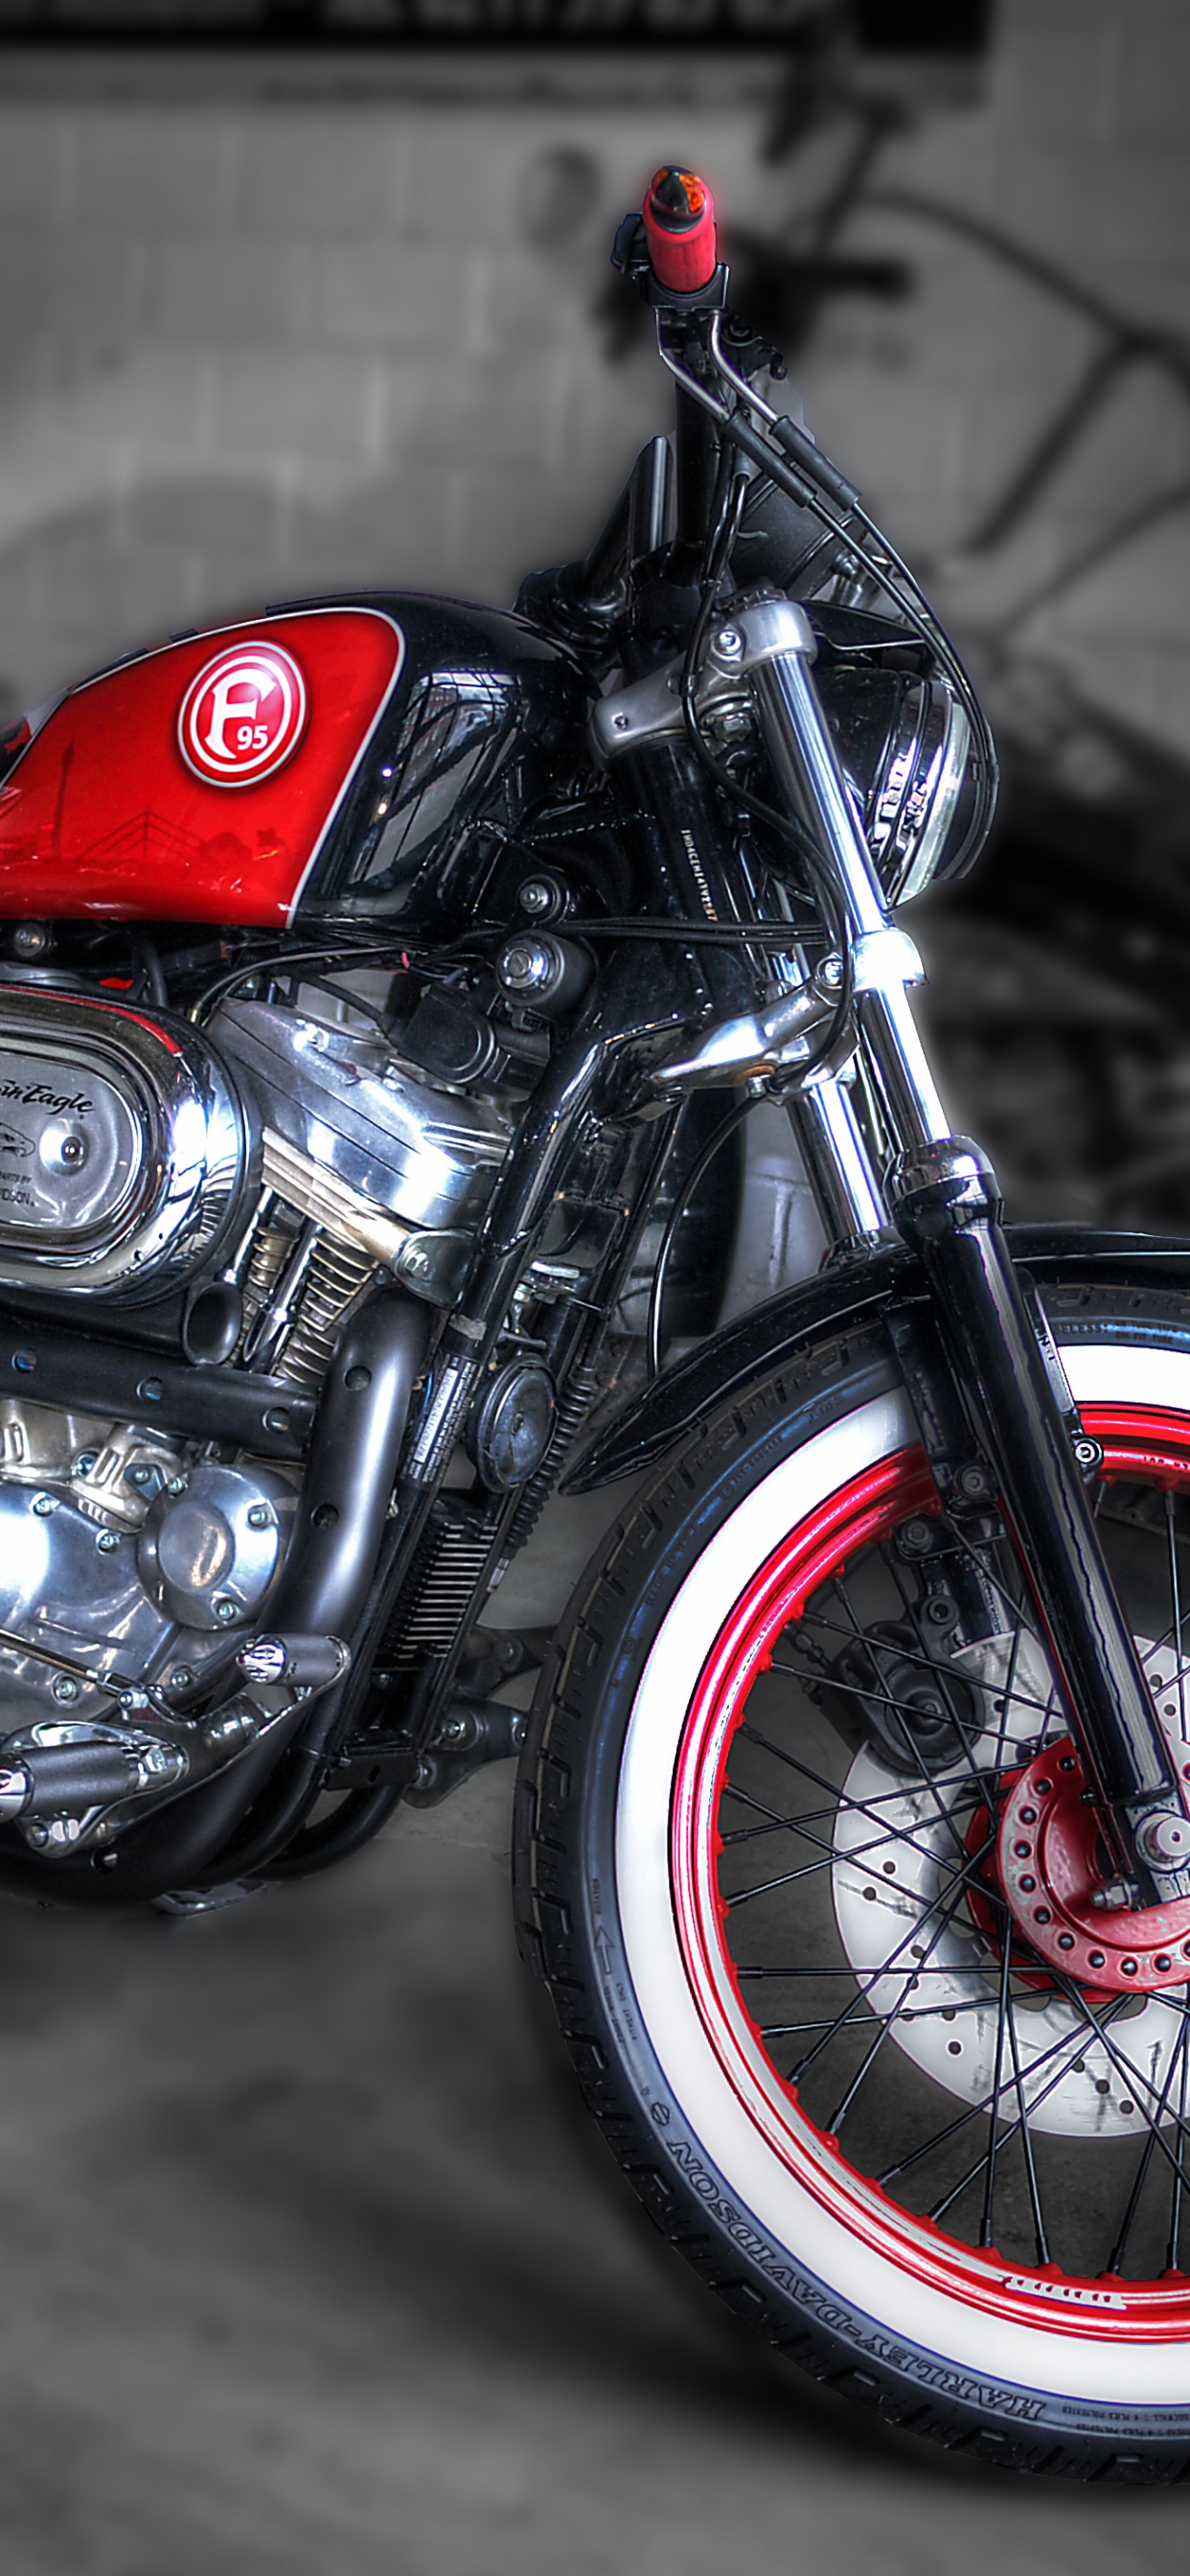 Red and Black Cruiser Motorcycle. Wallpaper in 1242x2688 Resolution